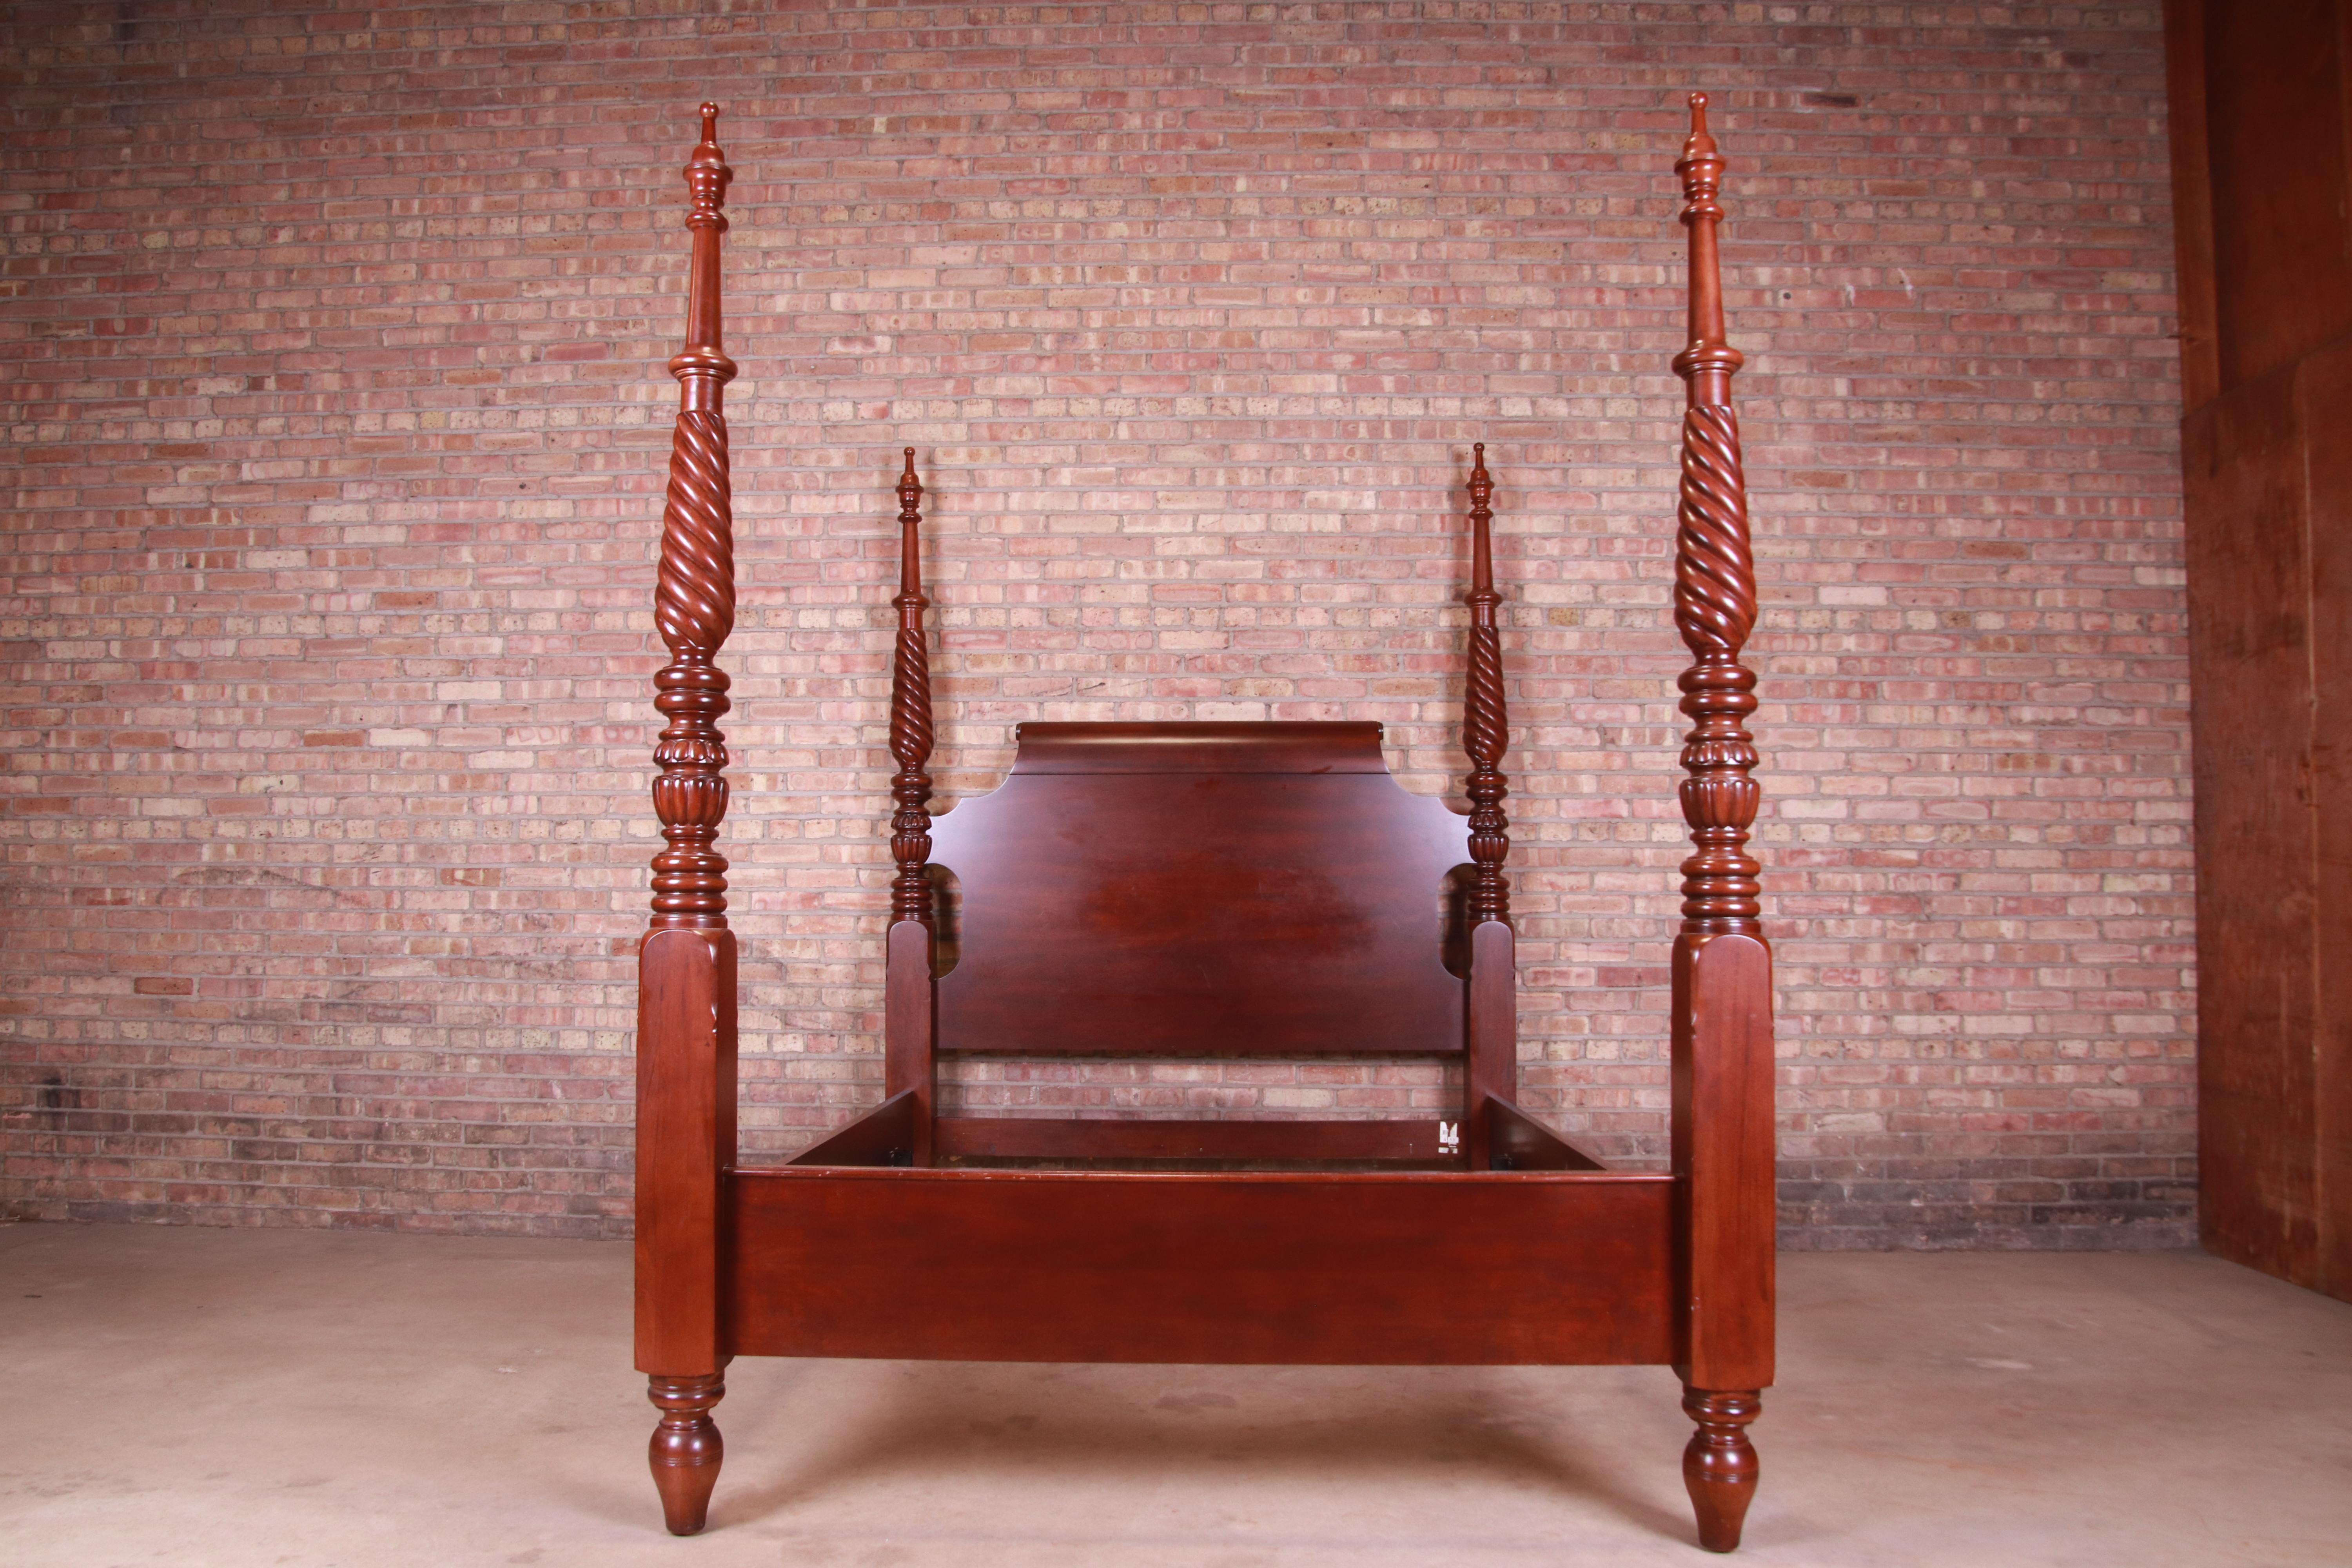 A gorgeous carved mahogany four poster queen size bed

In the manner of Ralph Lauren for Henredon

Circa 1990s

Measures: 68.25